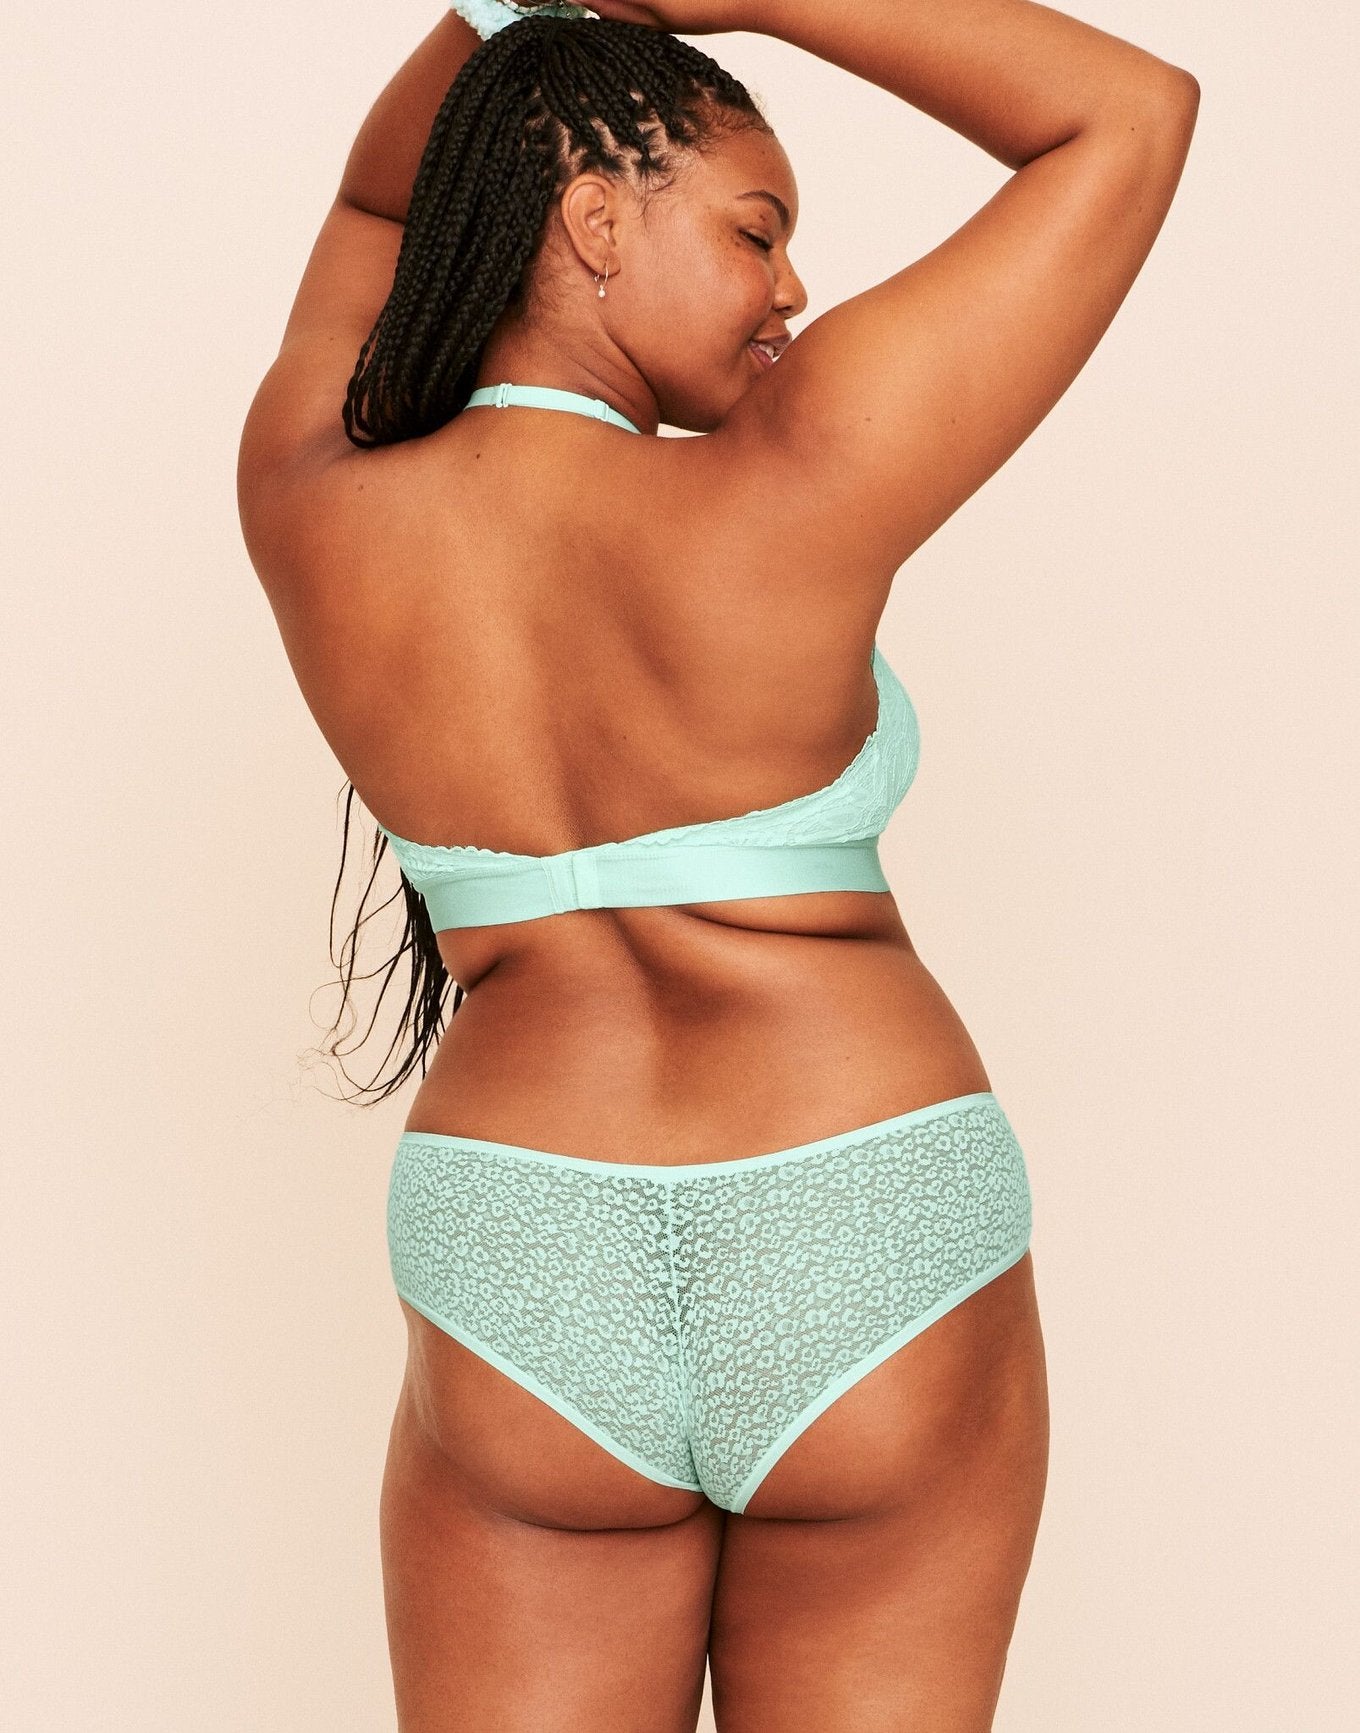 Earth Republic Billie Lace Lace Cheeky in color Bay and shape cheeky